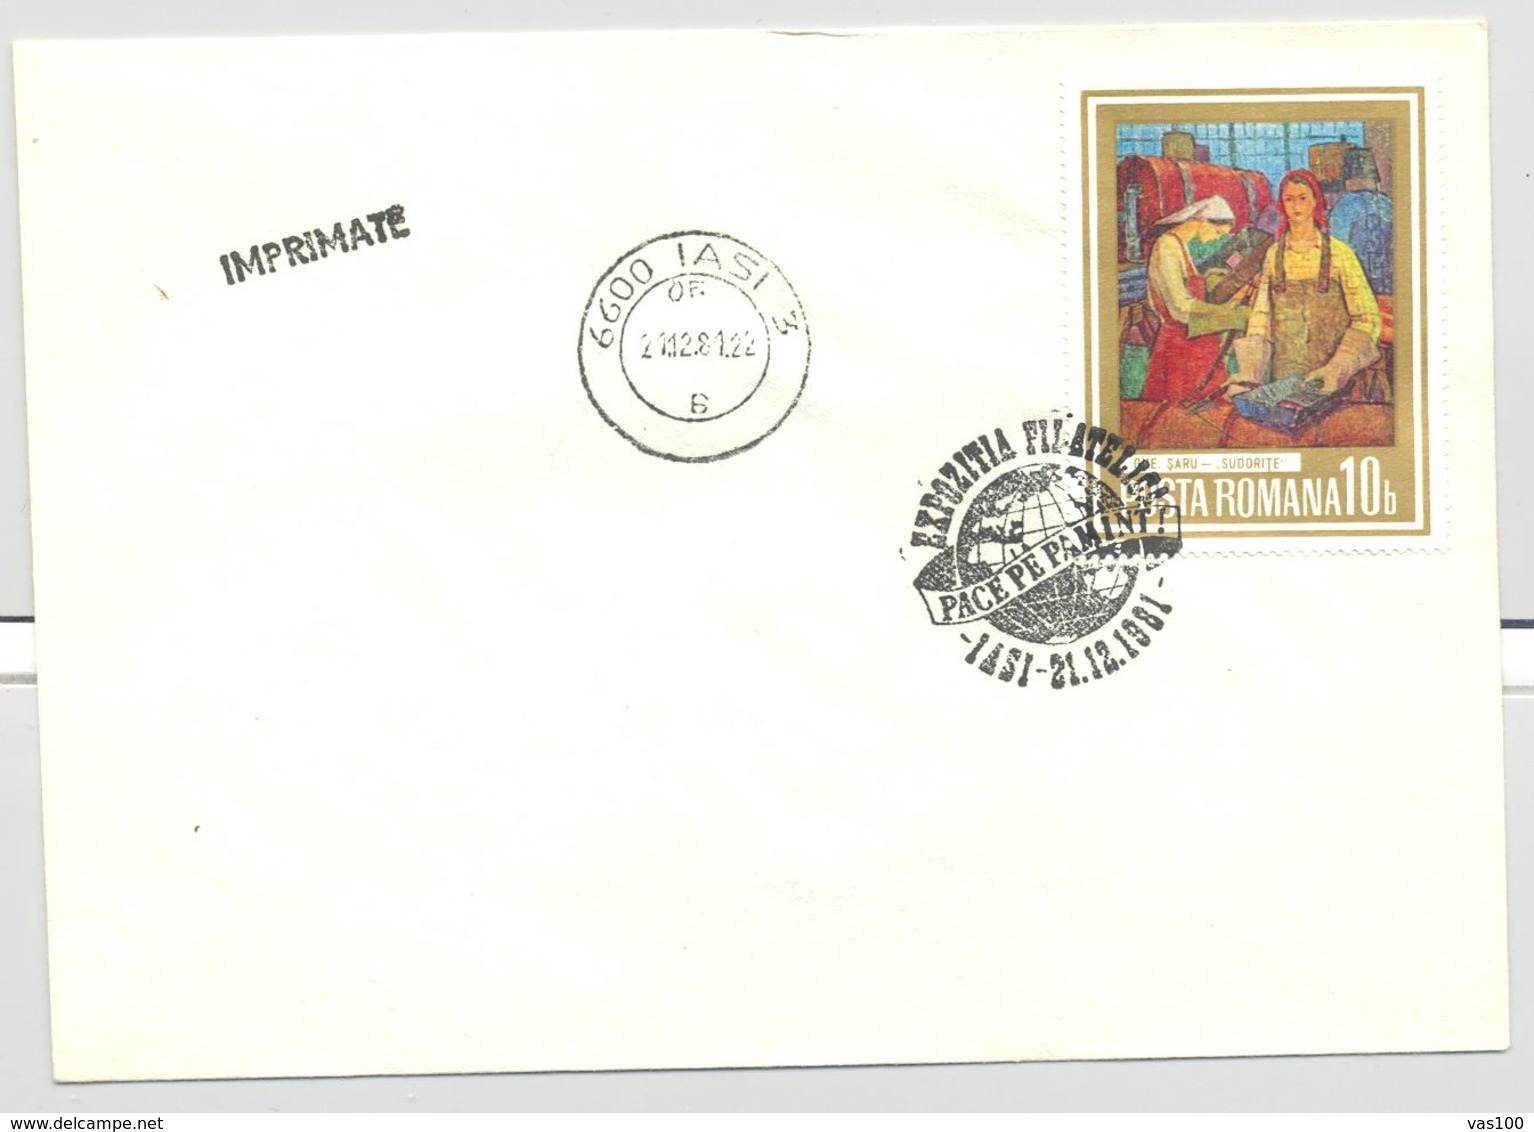 PEACE ON EARTH PHILATELIC EXHIBITION SPECIAL POSTMARK, PAINTING STAMP ON COVER, 1981, ROMANIA - Lettres & Documents